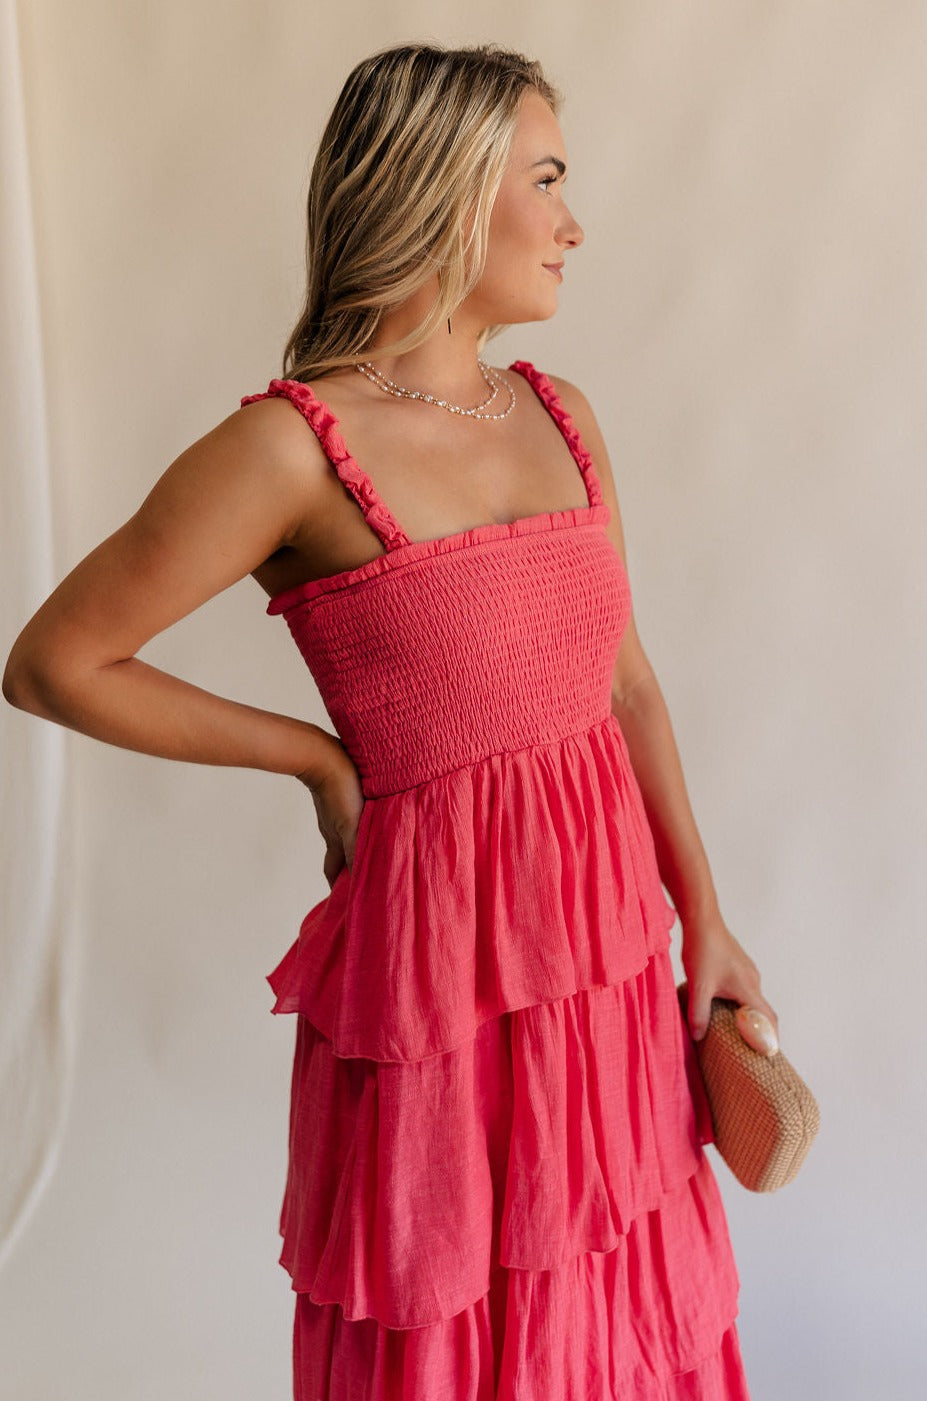 Side view of female model wearing the Nova Smocked Tiered Midi Dress which features Lightweight Fabric, Fully Lined, Tiered Ruffle Body, Smocked Upper, Square Neckline and Elastic Straps.